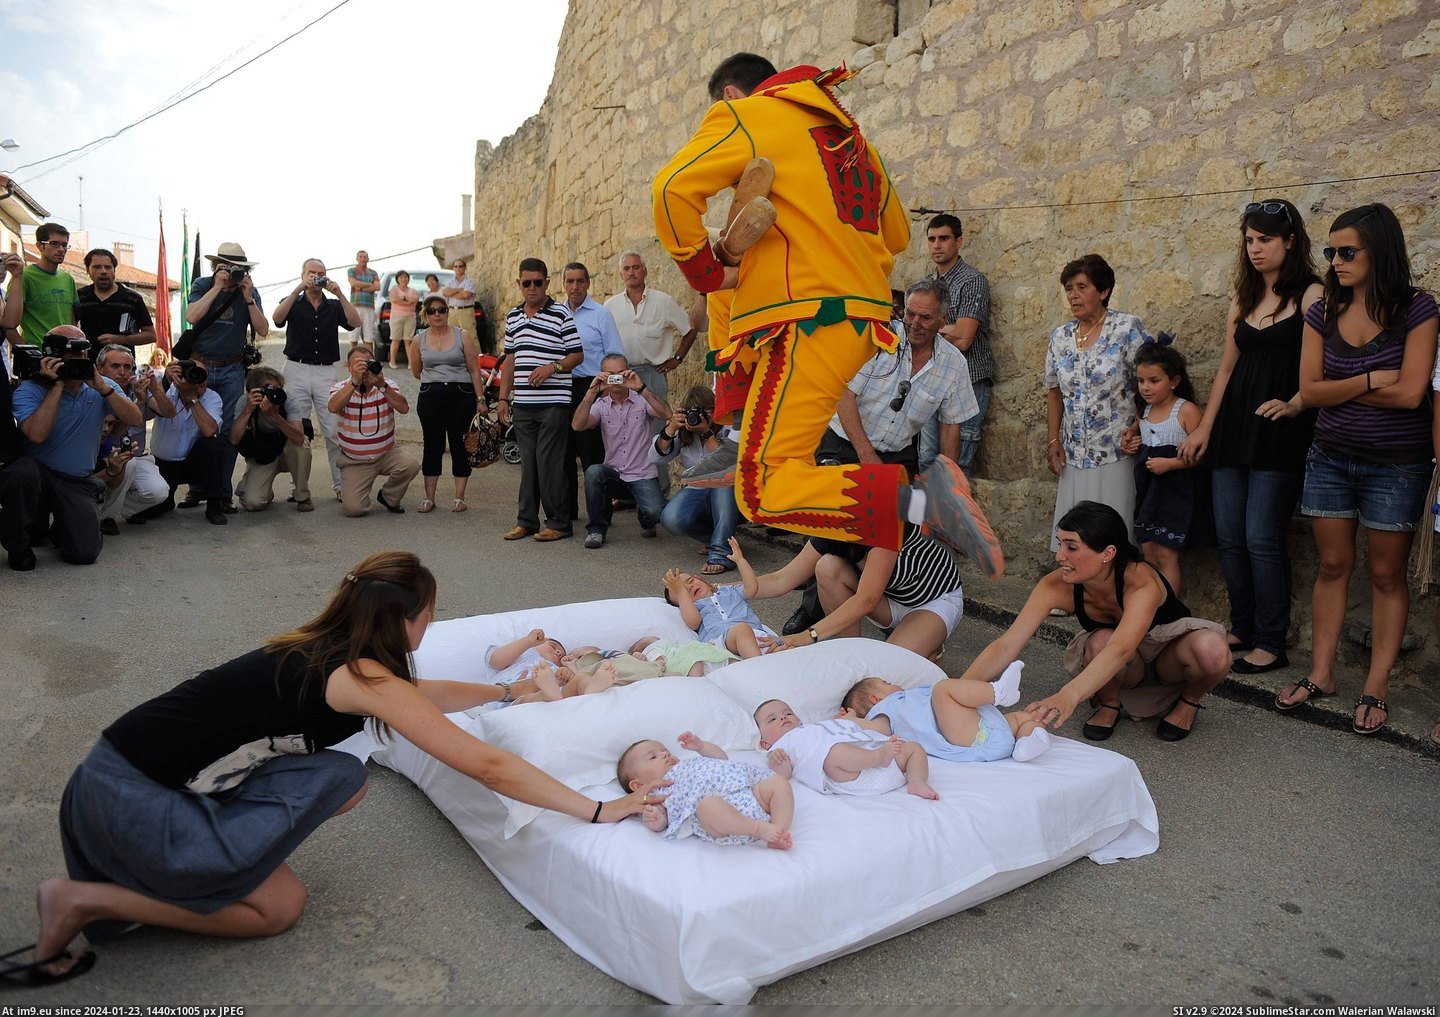 #Wtf #Baby #Festival #Spain #Jumping [Wtf] Baby Jumping Festival in Spain Pic. (Изображение из альбом My r/WTF favs))